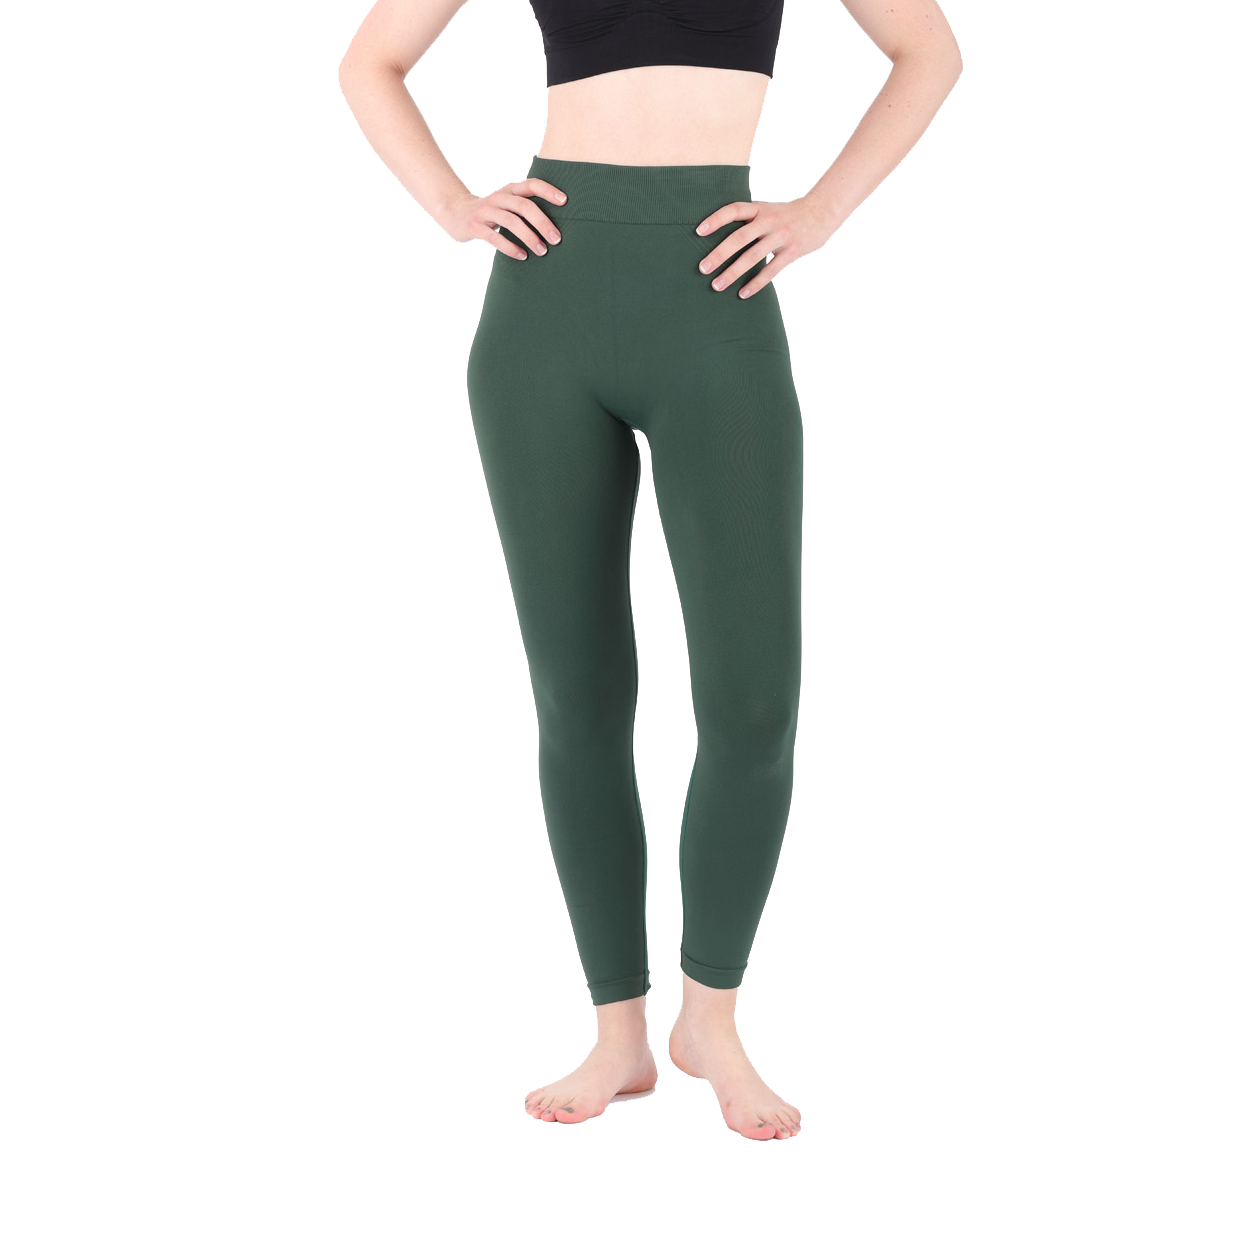 Signature High Rise Leggings - Black with Sand Stitching | Low Maintenance